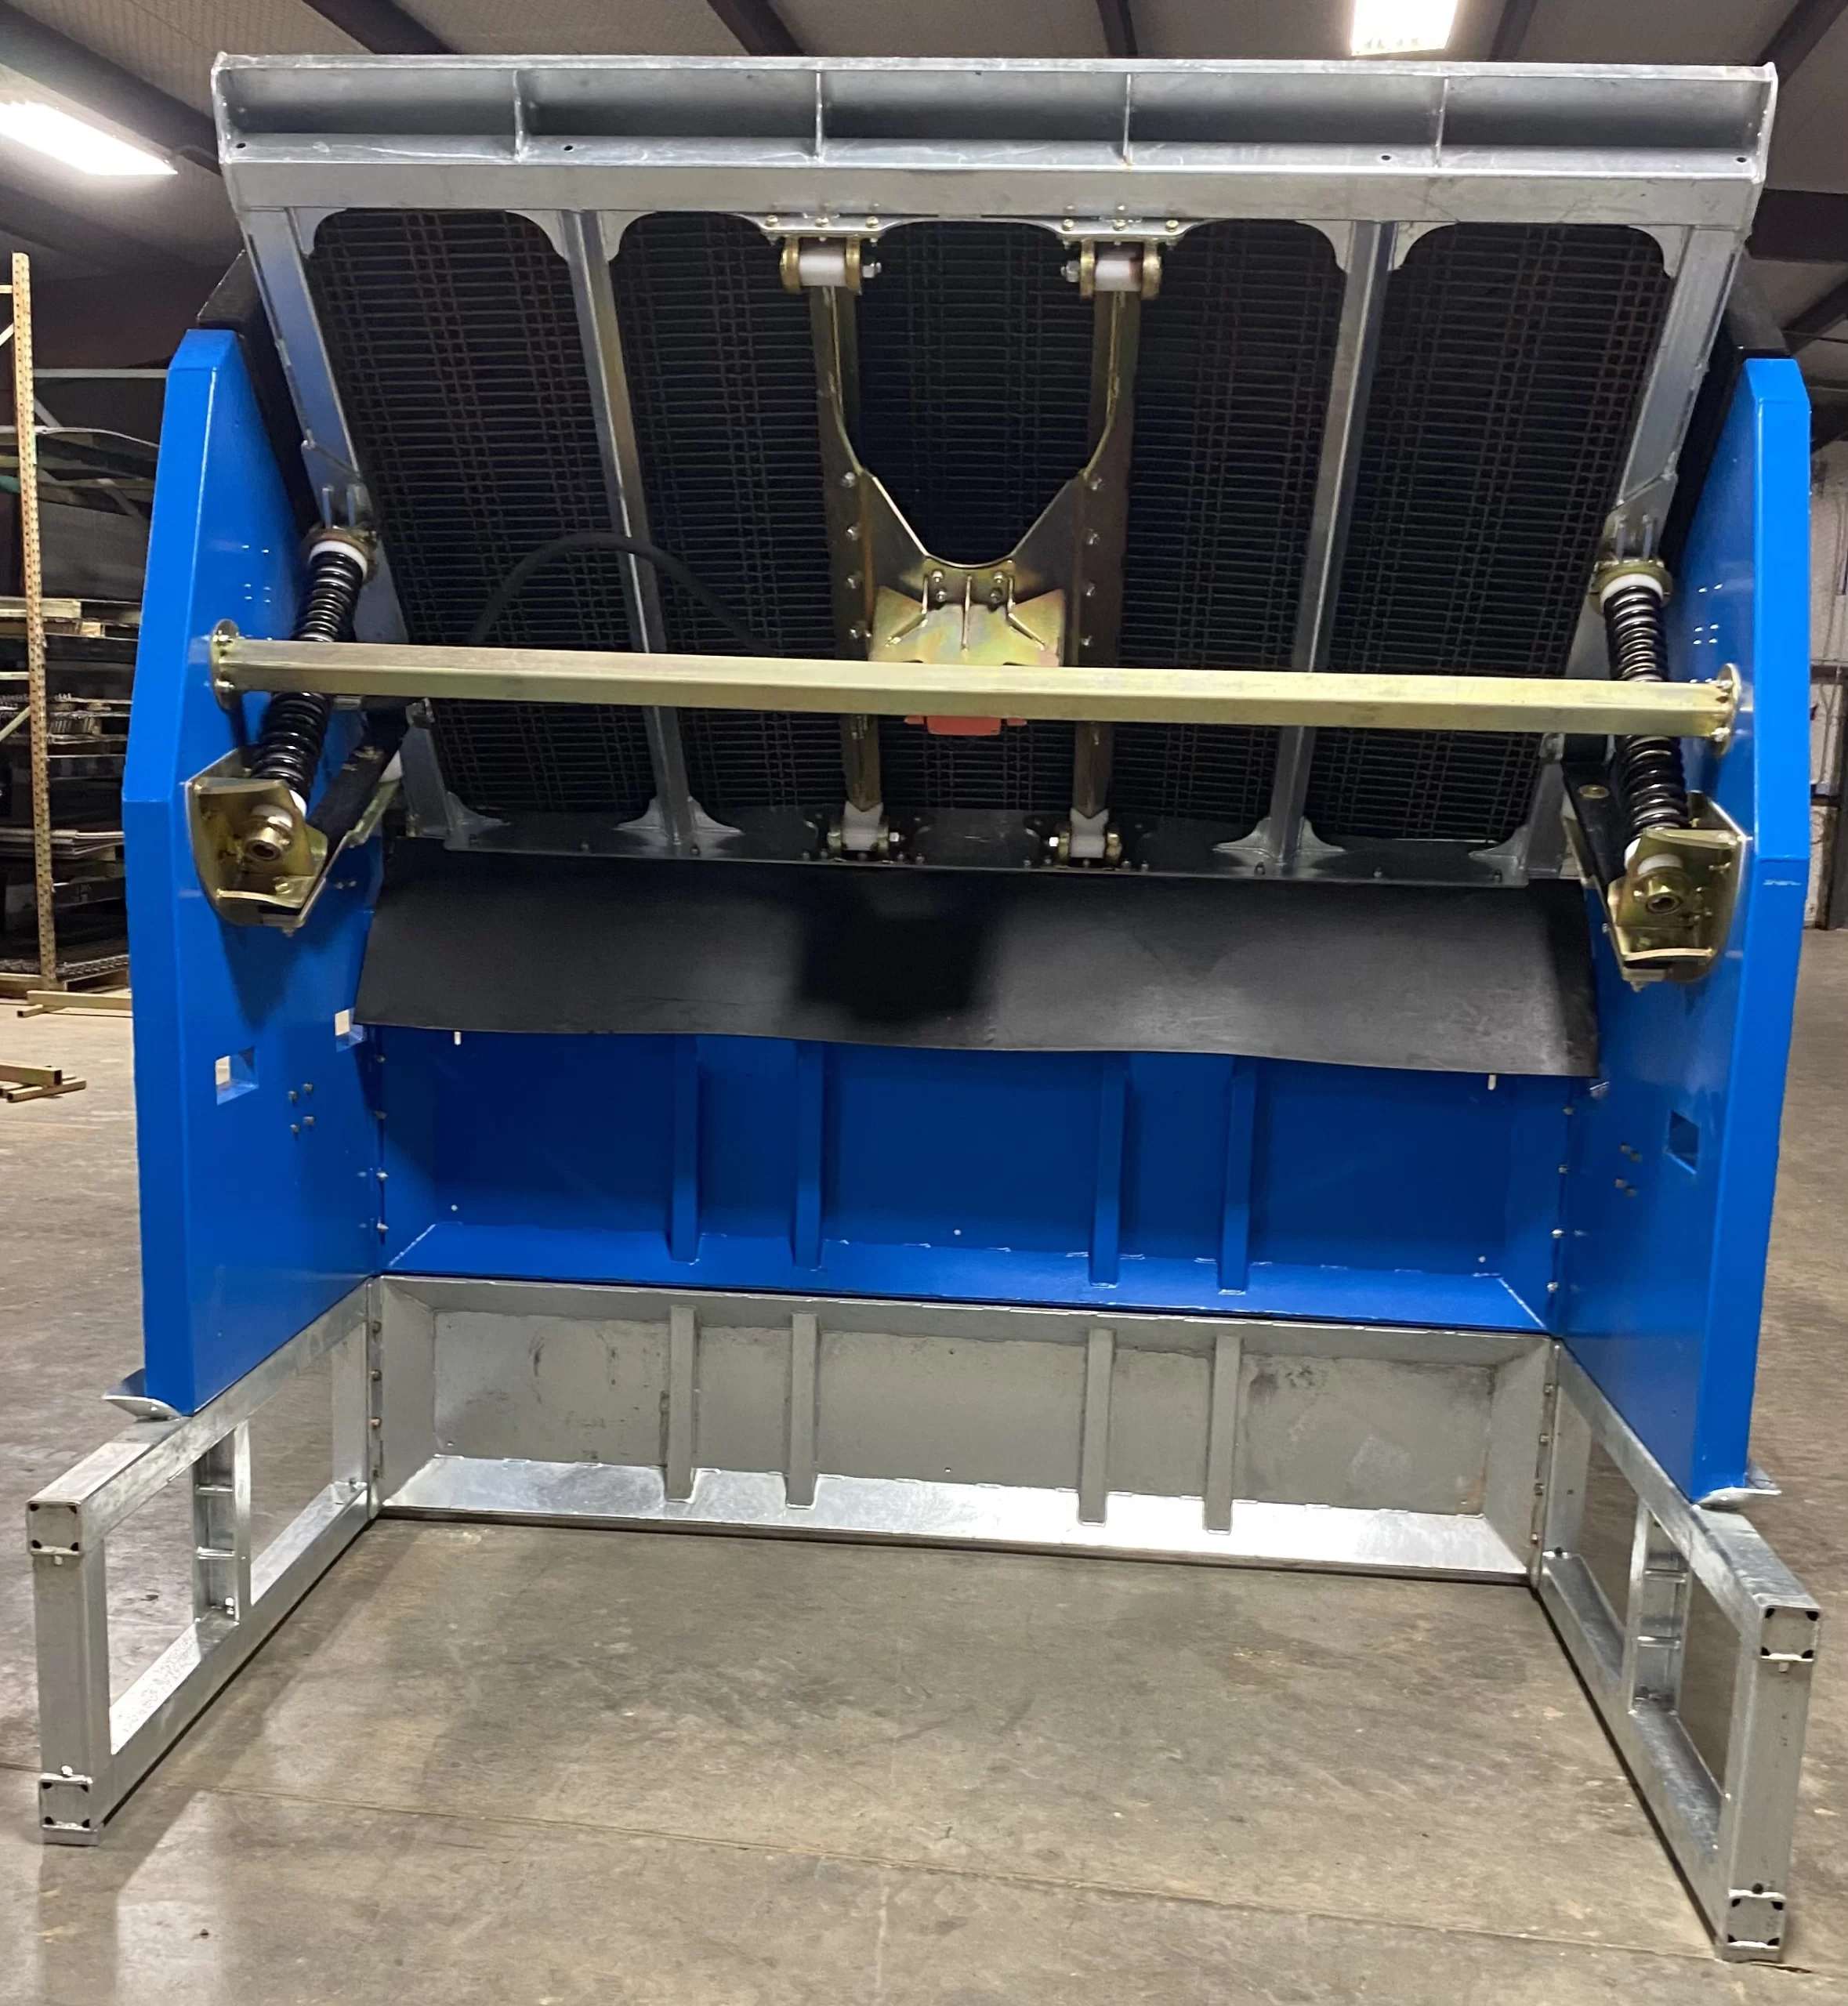 vibratory screener pack is shielded